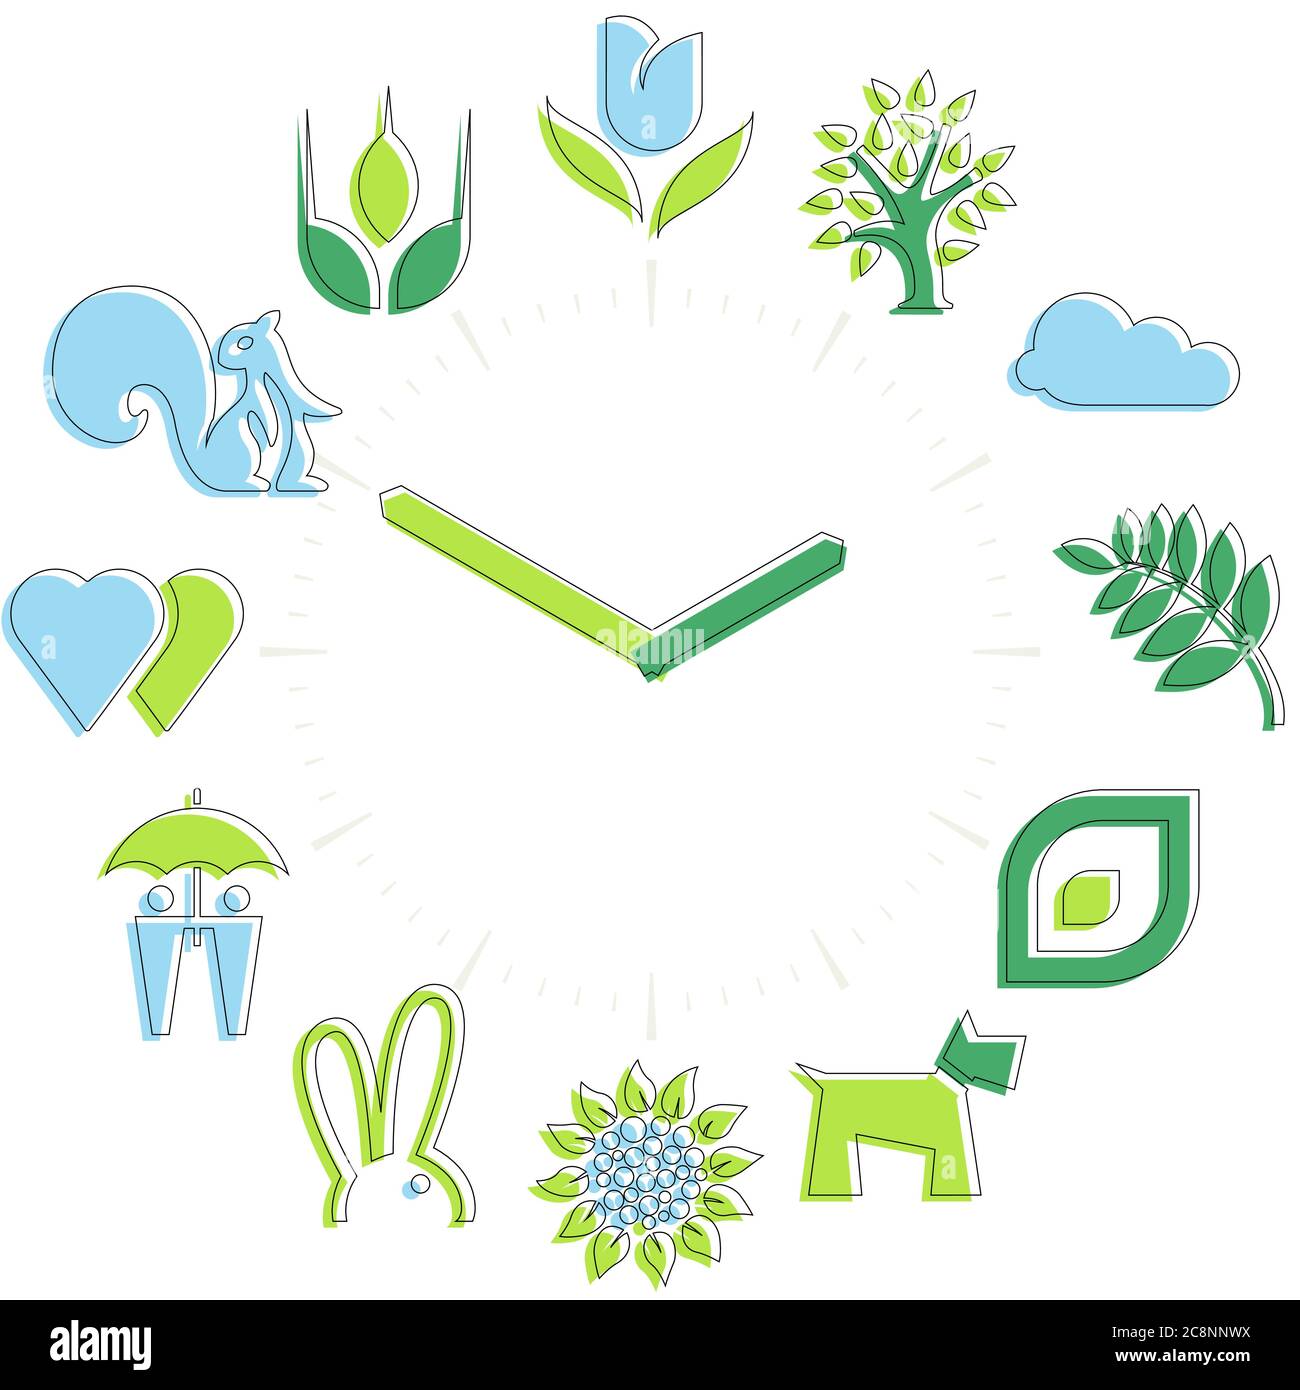 Vector illustration. Spring time. Activities icons in a watch sphere with hours. Stock Vector